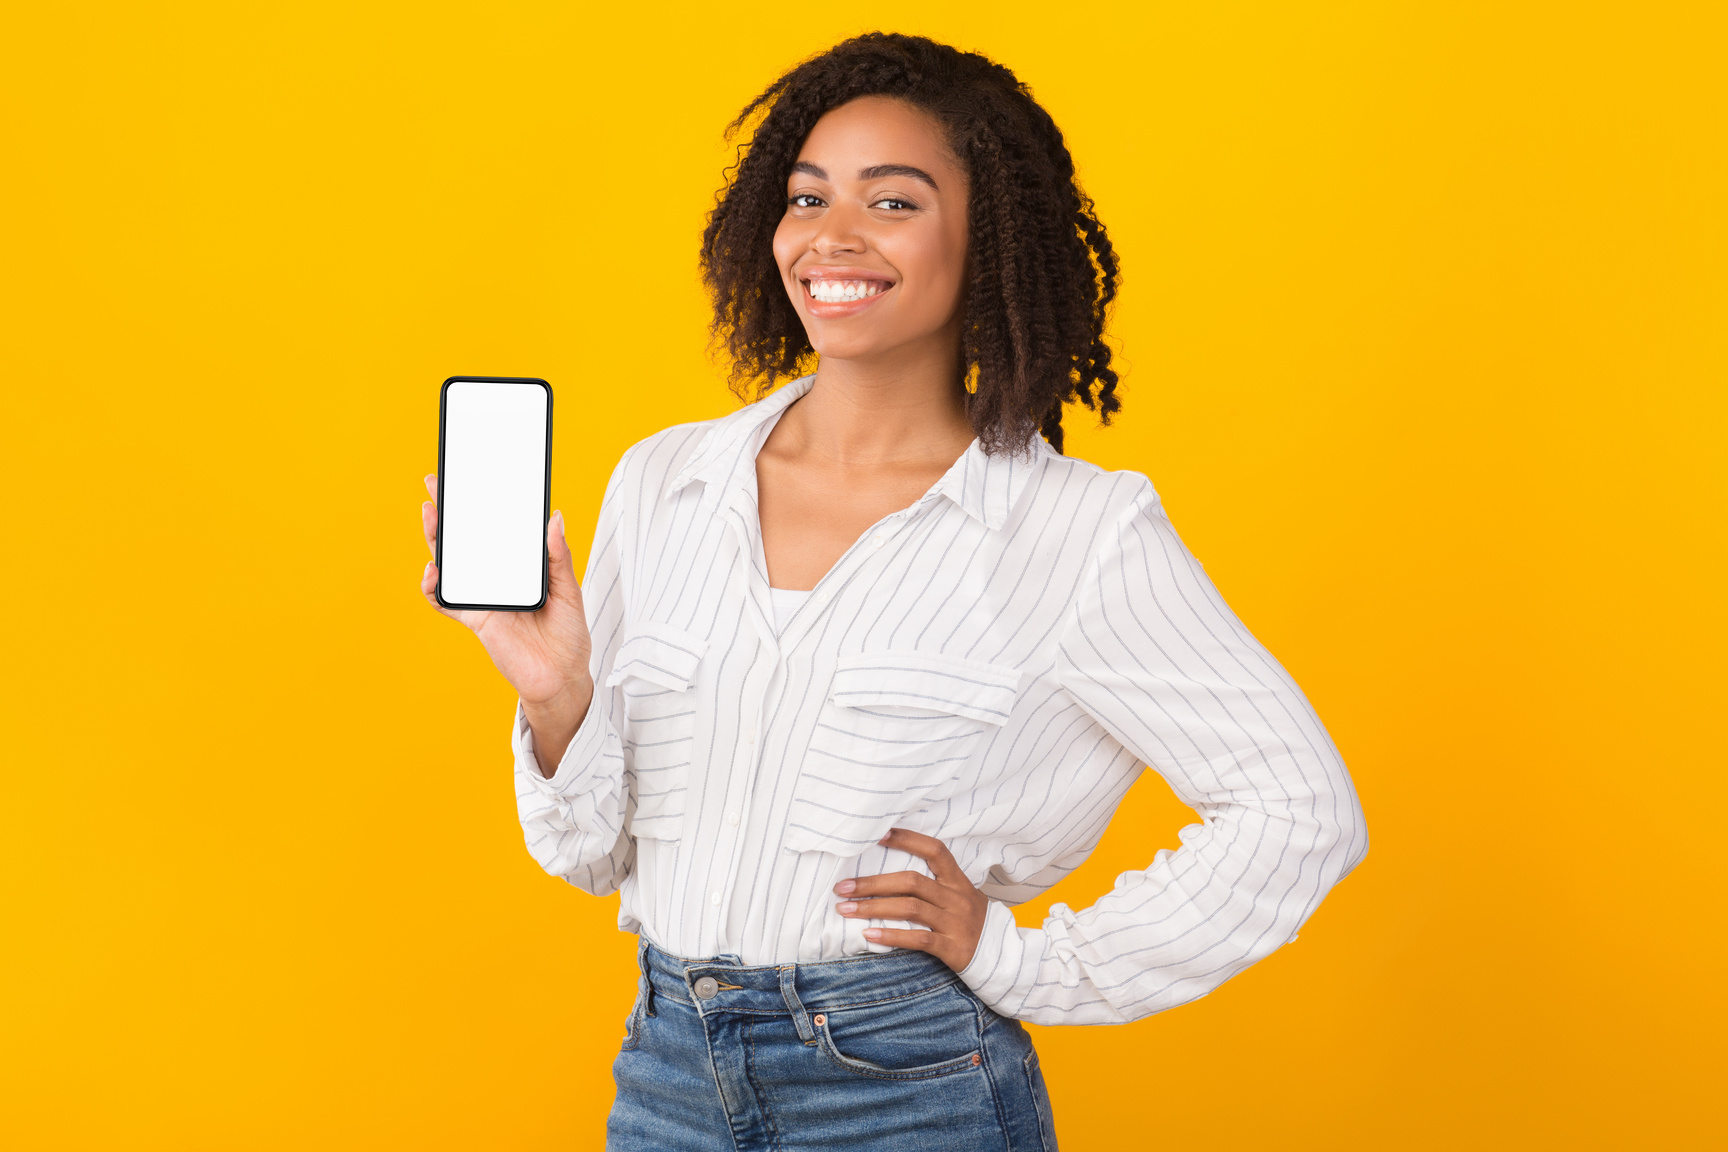 Smiling afro woman showing new app on phone